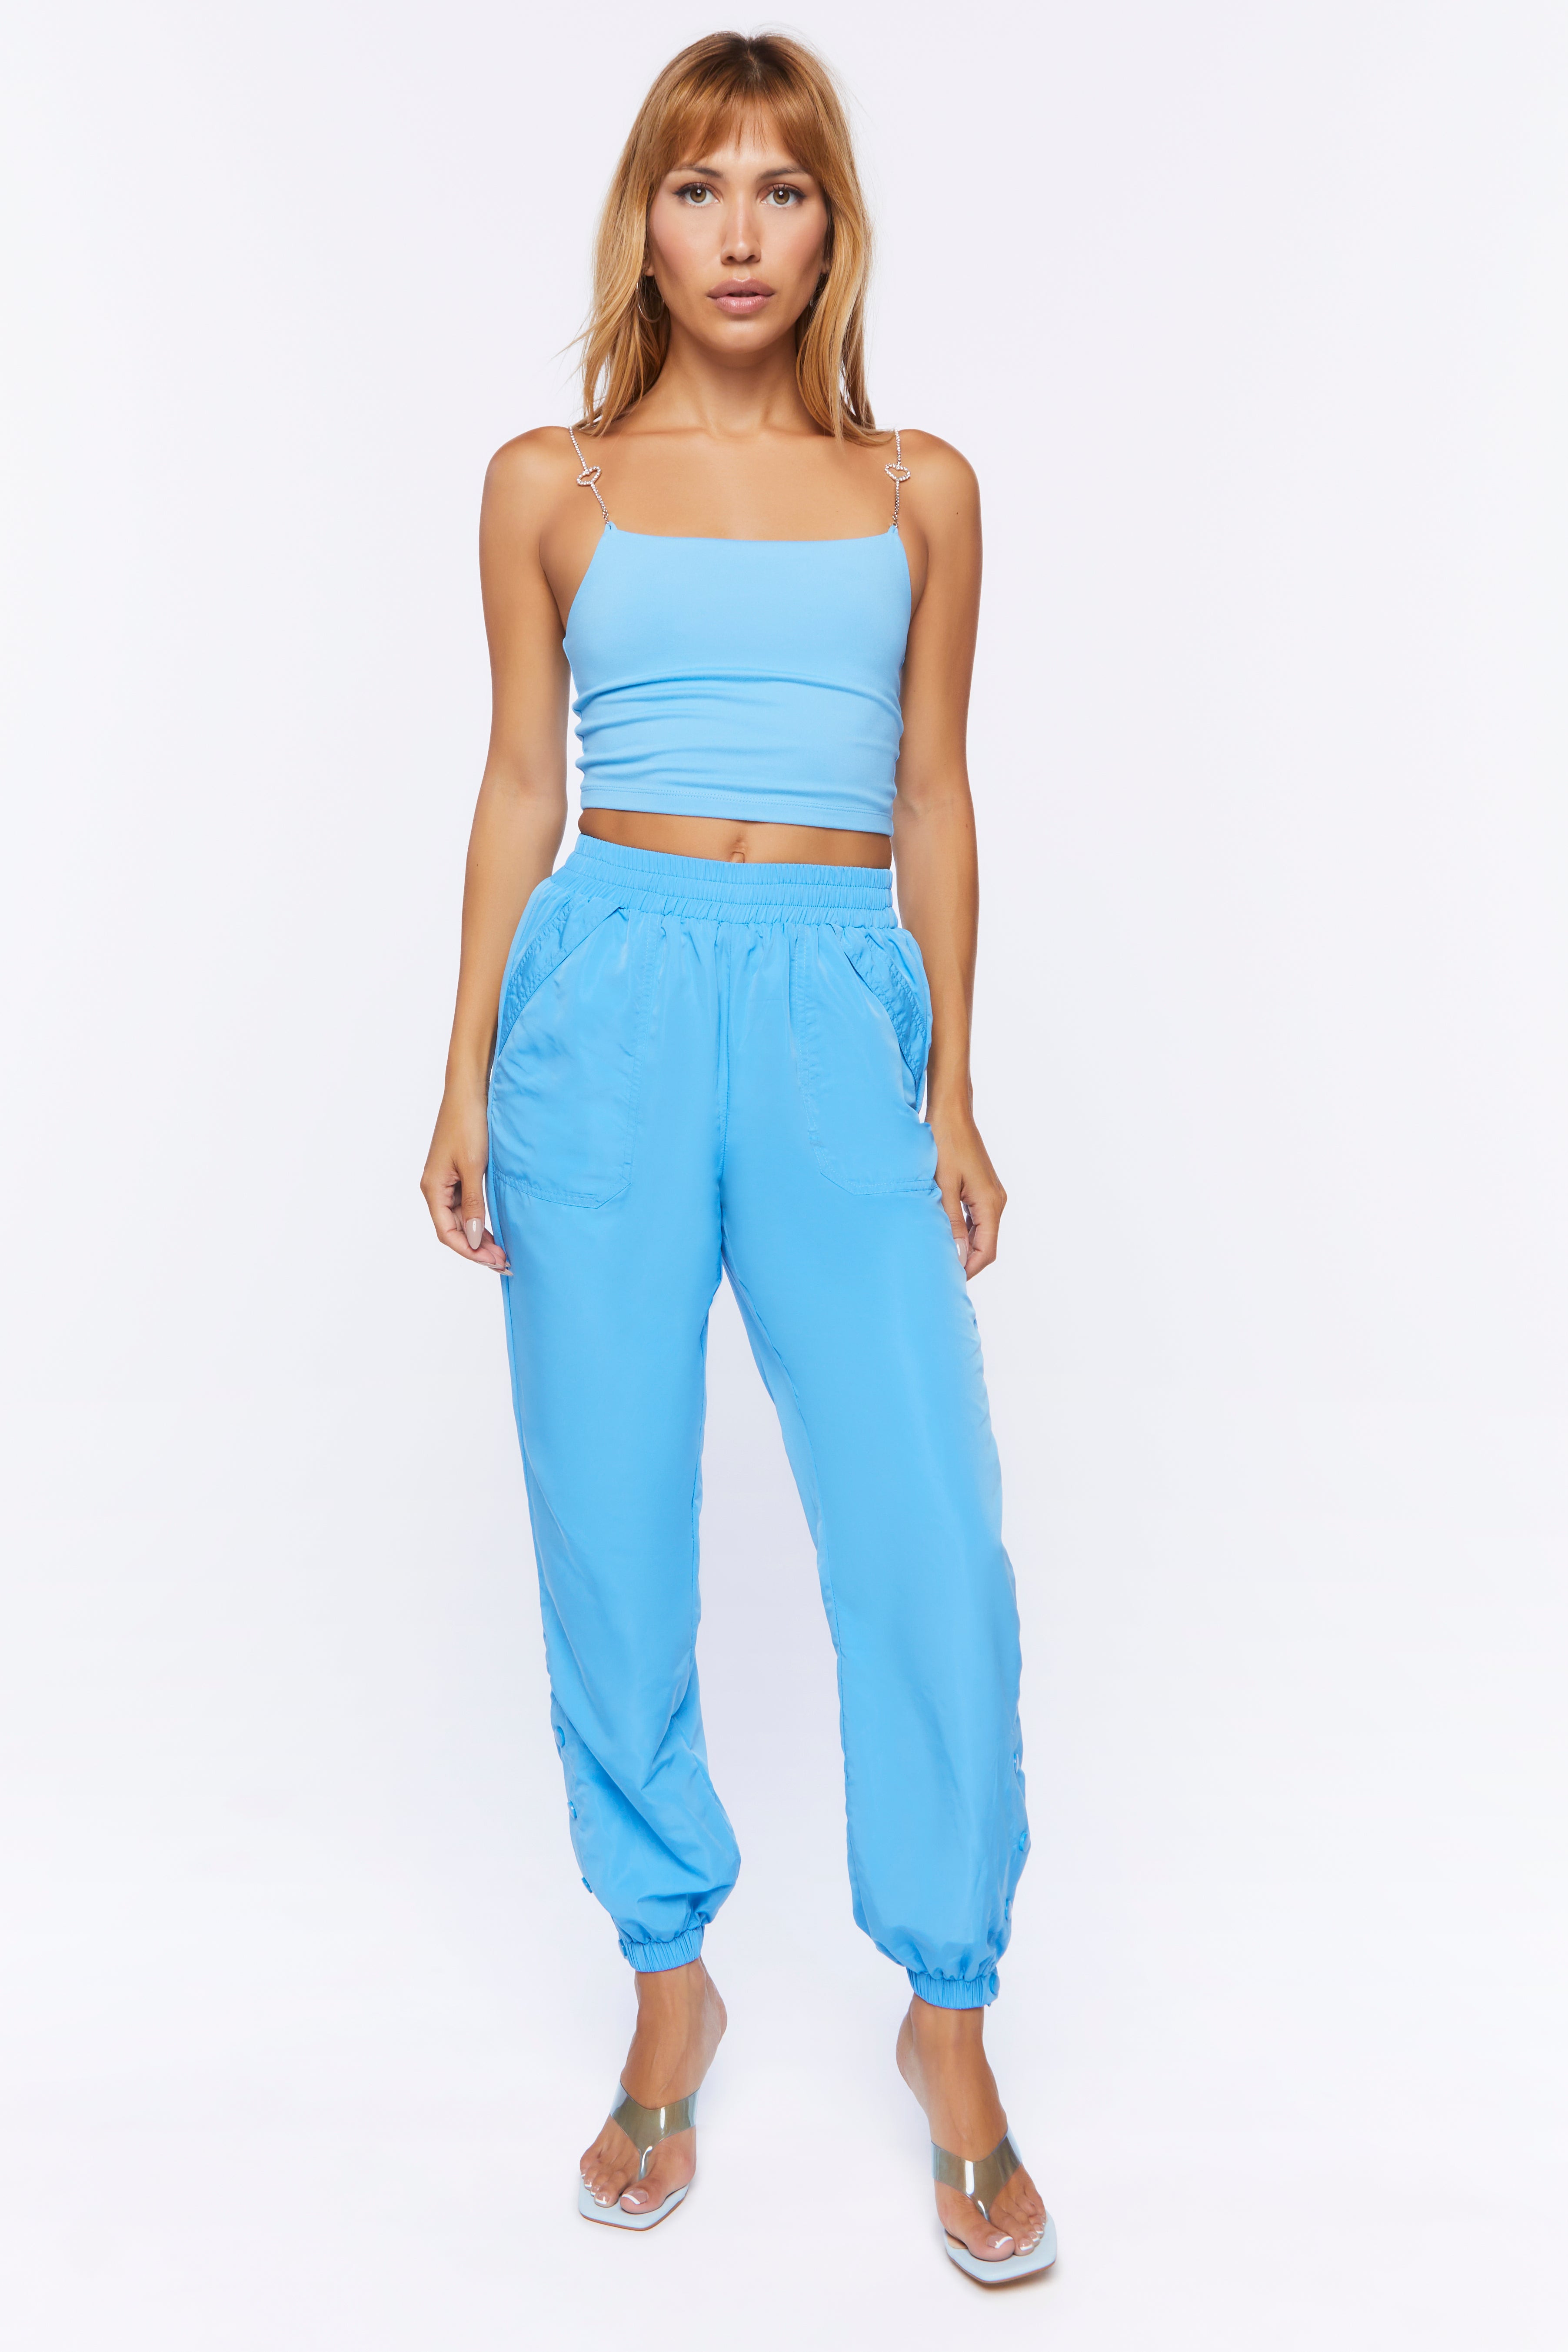 Women Apparel | Rhinestone Heart Cropped Cami Blue Forever21 - CO32331